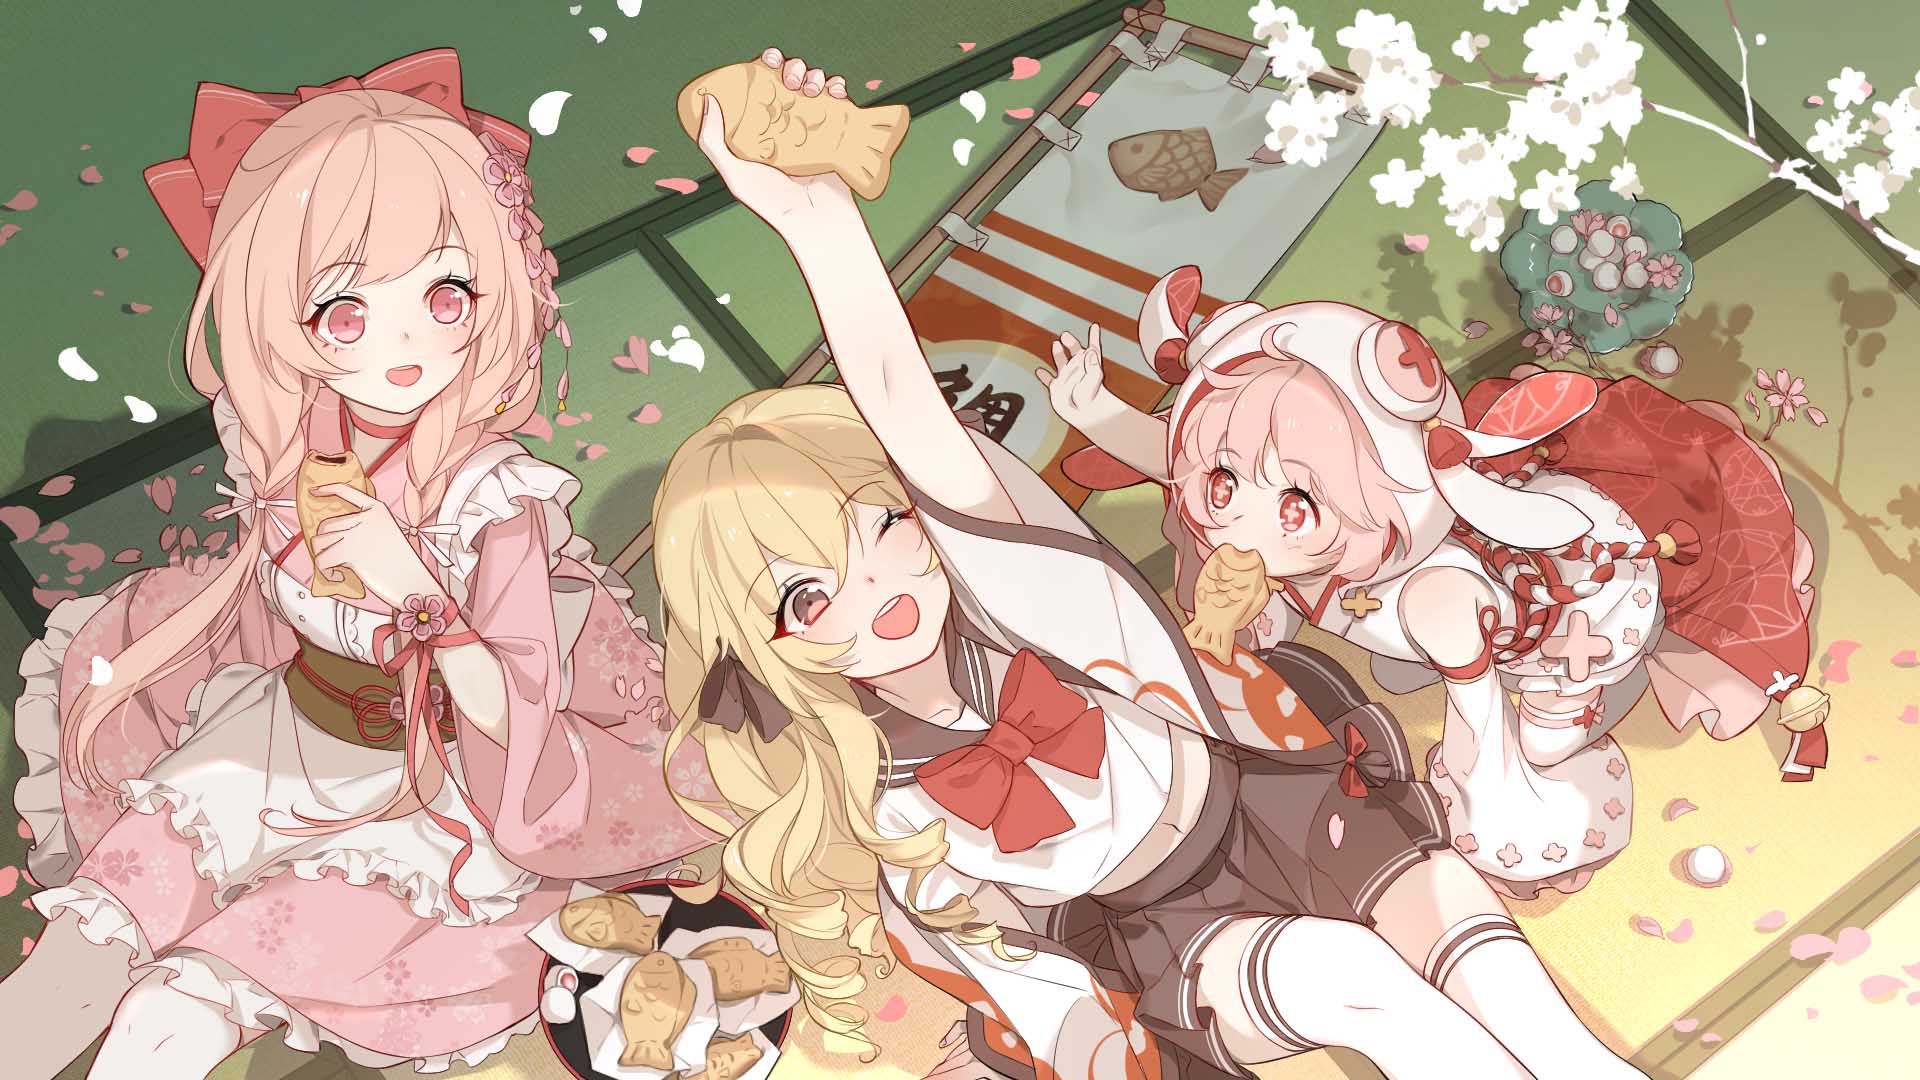 Pre-registration open for ‘Food Fantasy’ the F2P “Food Personified” RPG